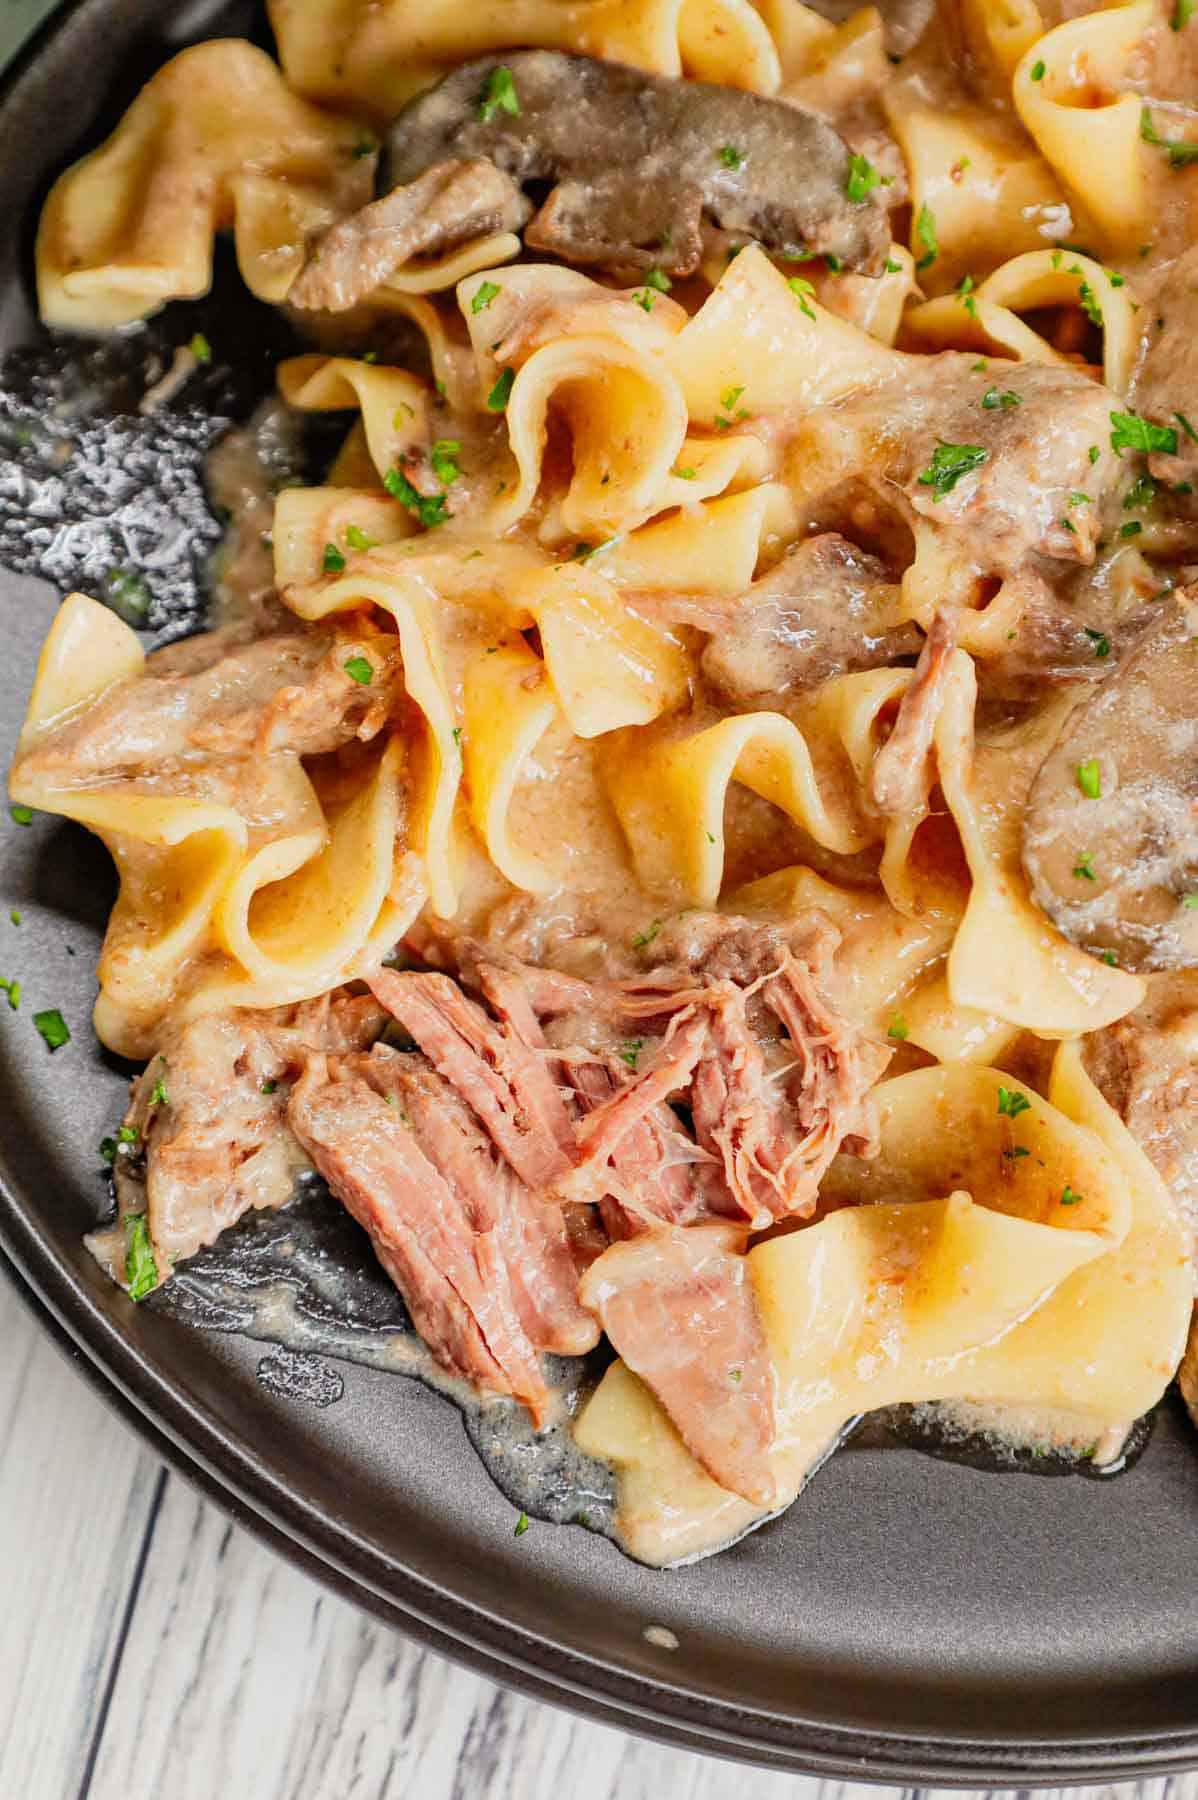 Crock Pot Beef Stroganoff is a hearty slow cooker dinner recipe loaded with tender chunks of stewing beef, sliced mushrooms, onions and egg noodles all in a delicious beef broth and cream of mushroom sauce.